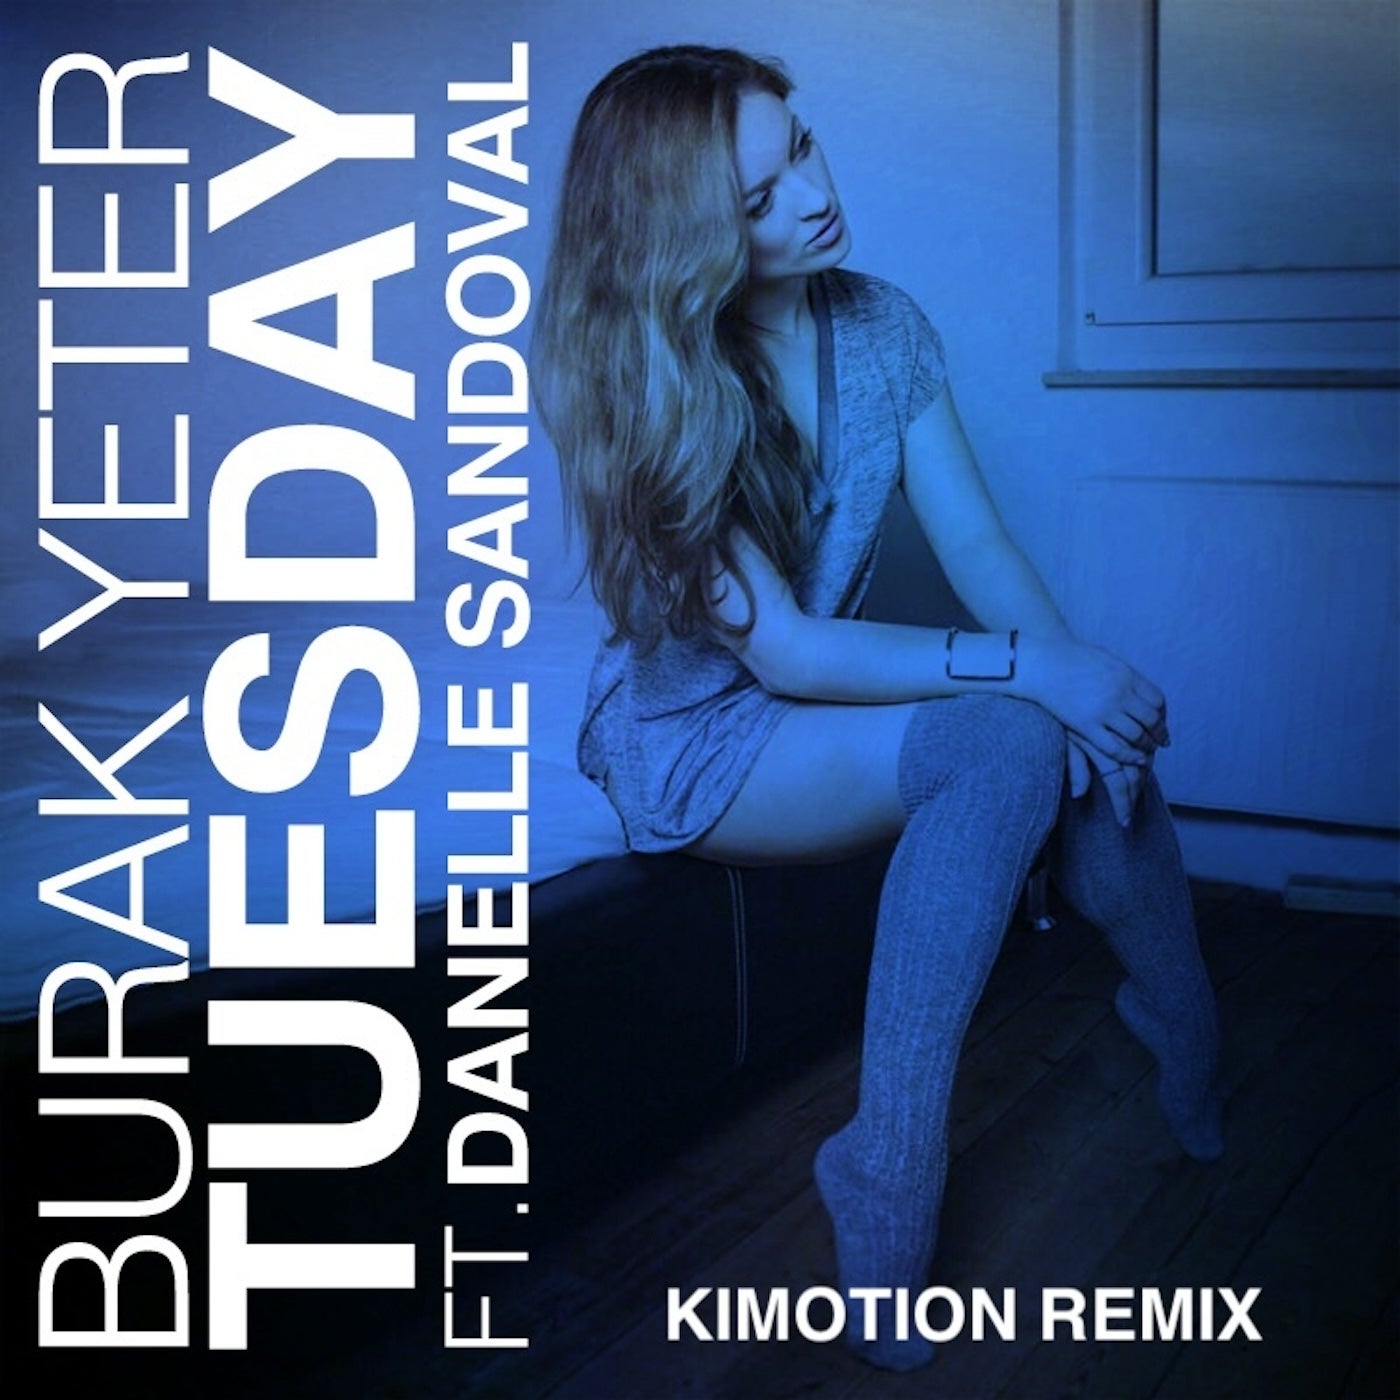 image cover: Burak Yeter, Danelle Sandoval, Kimotion - Tuesday (Kimotion Remix) on Connection Records